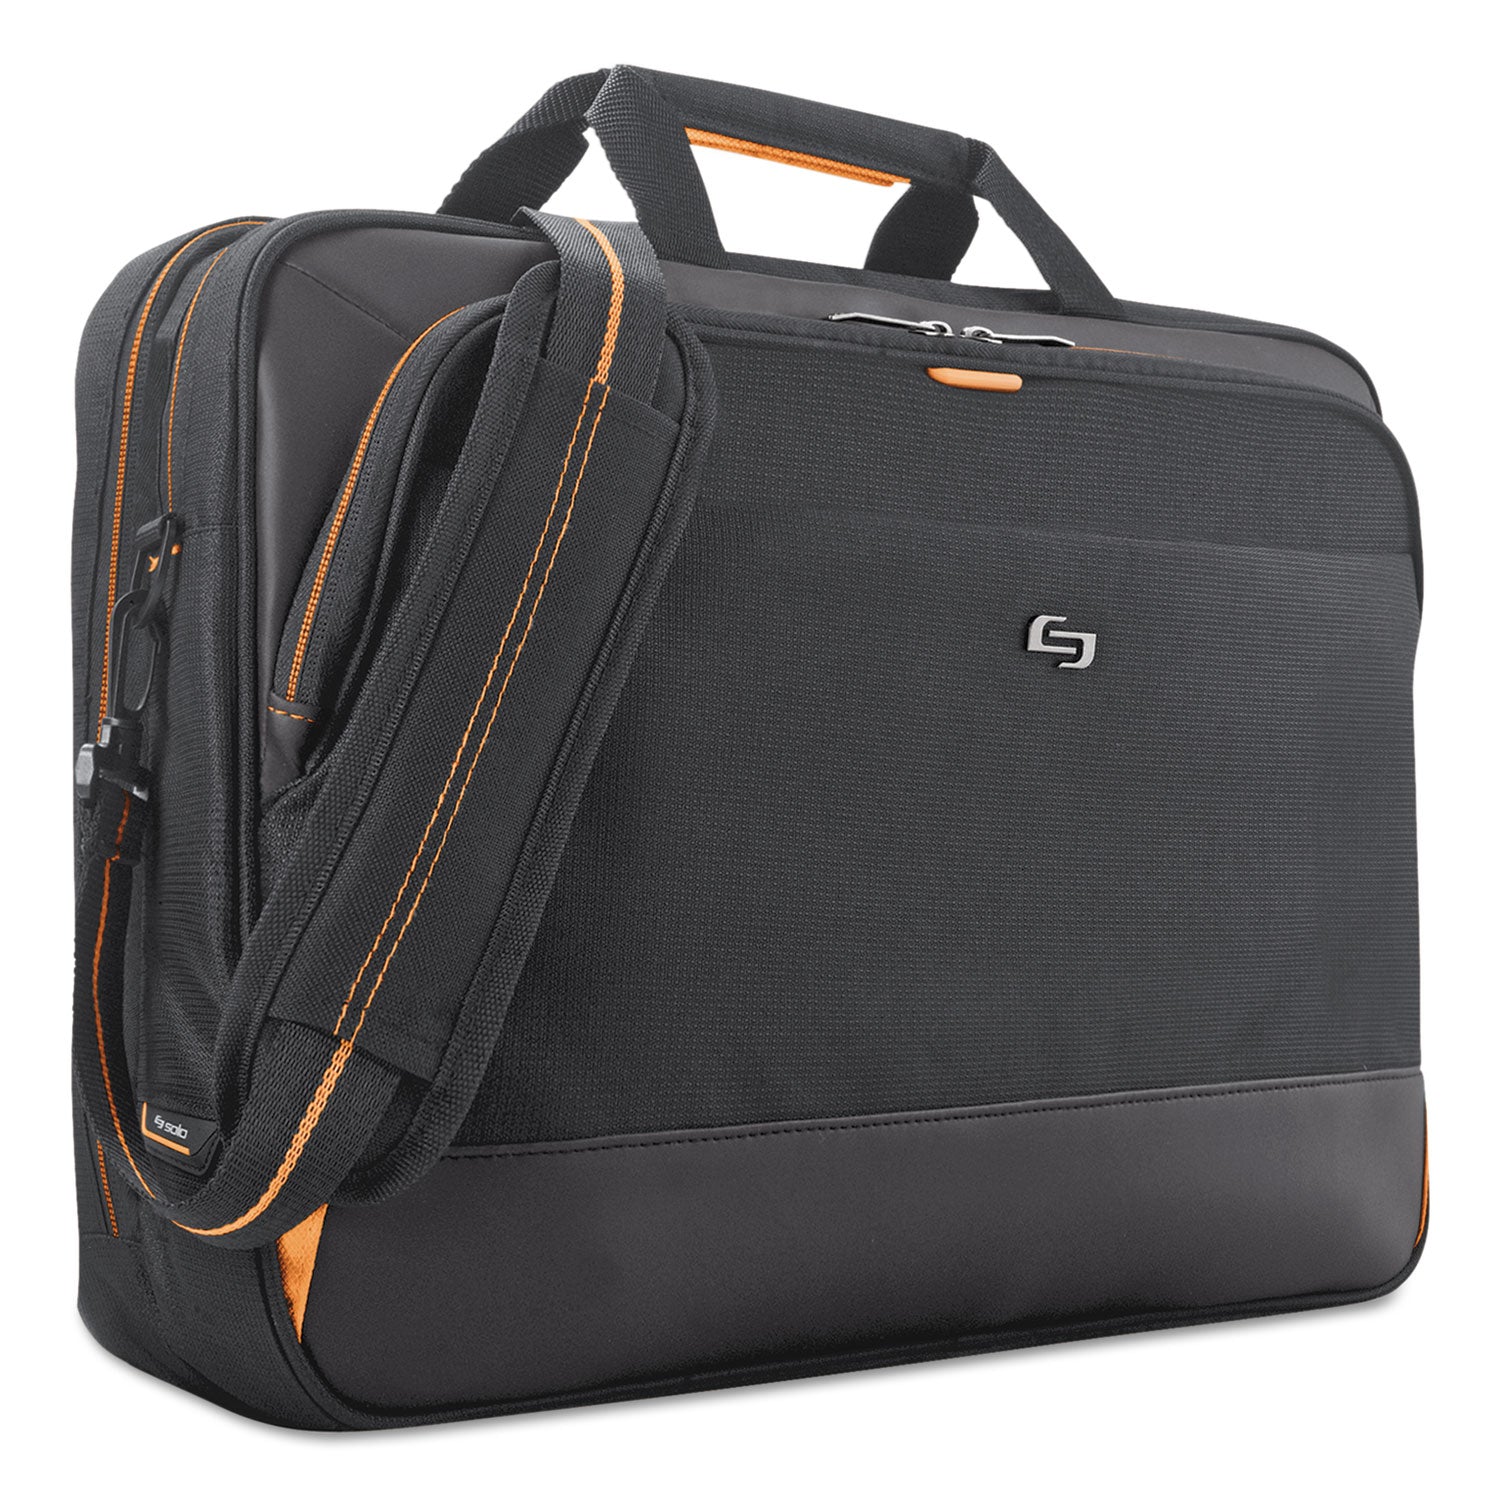 Urban Ultra Multicase, Fits Devices Up to 17.3", Polyester, 17 x 4 x 12.25, Black - 